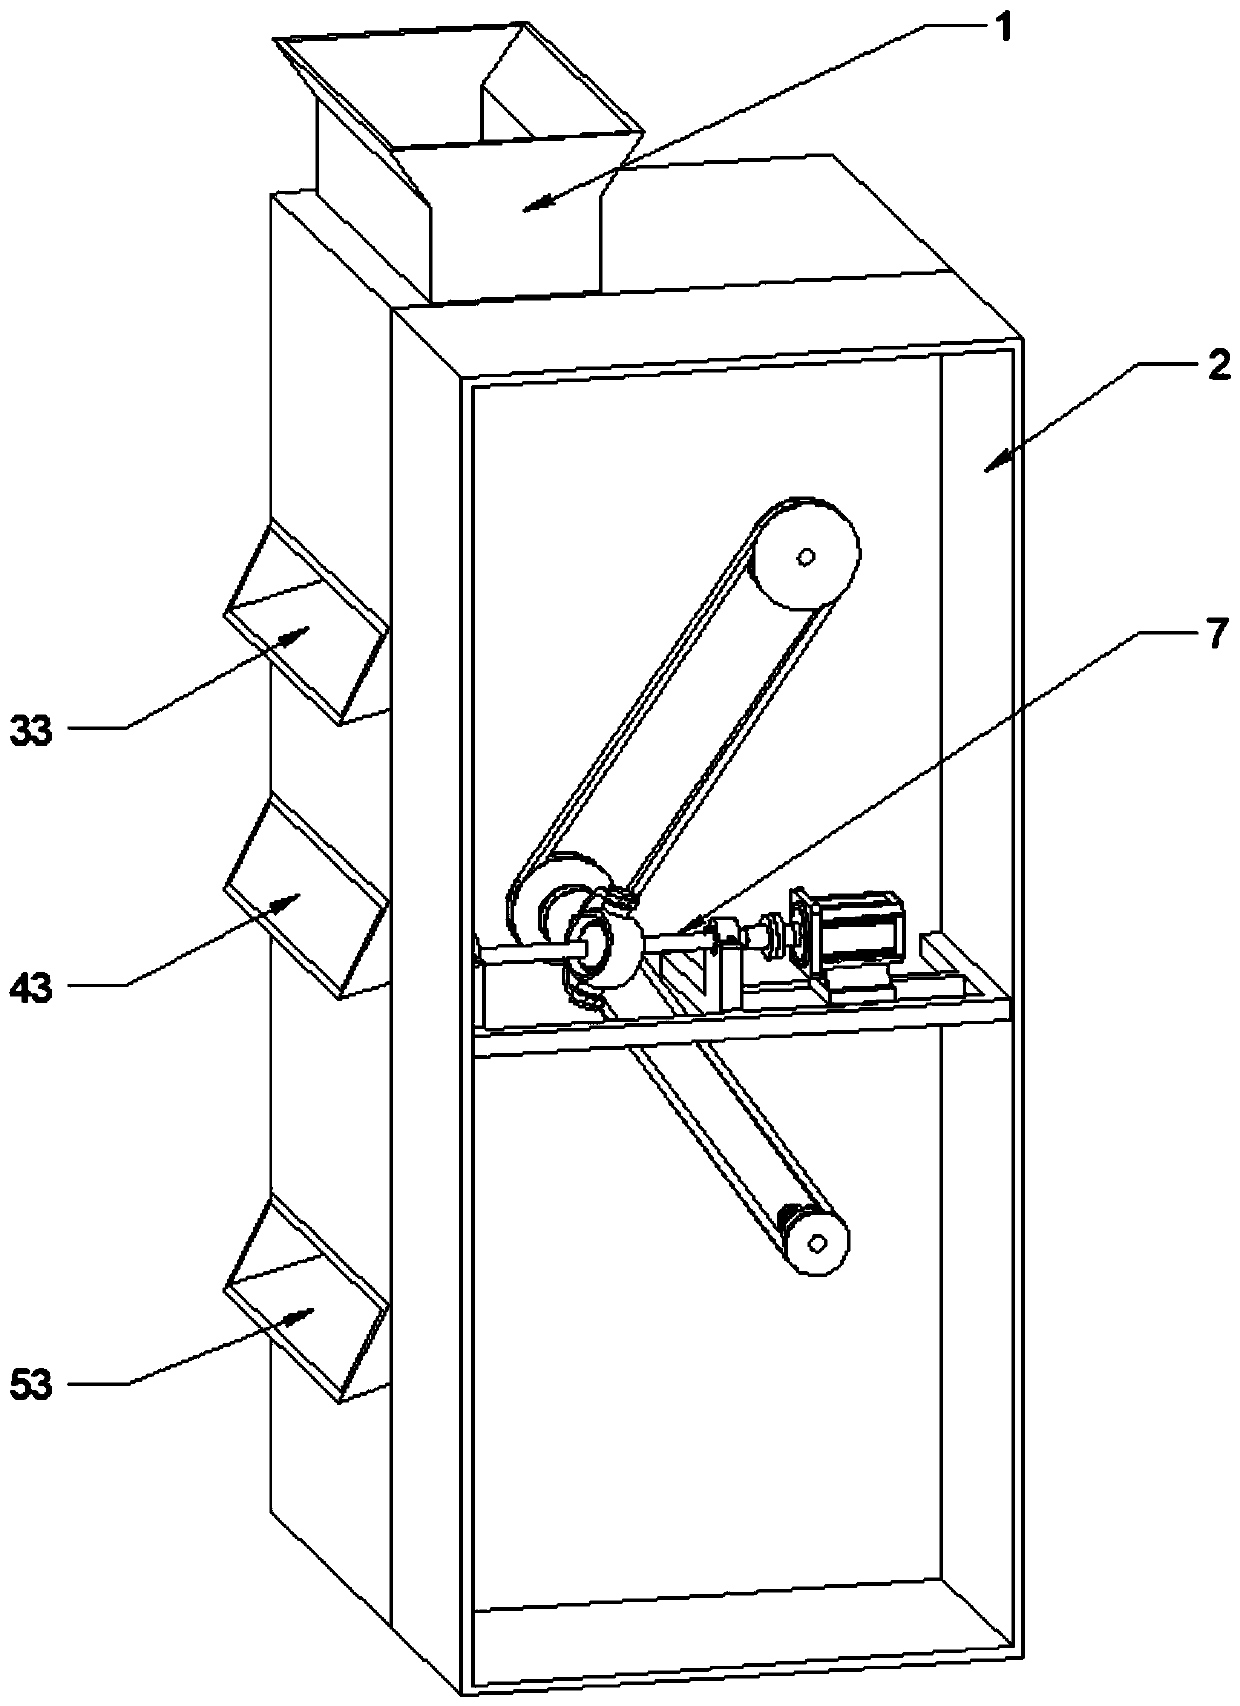 Screening device for construction waste treatment